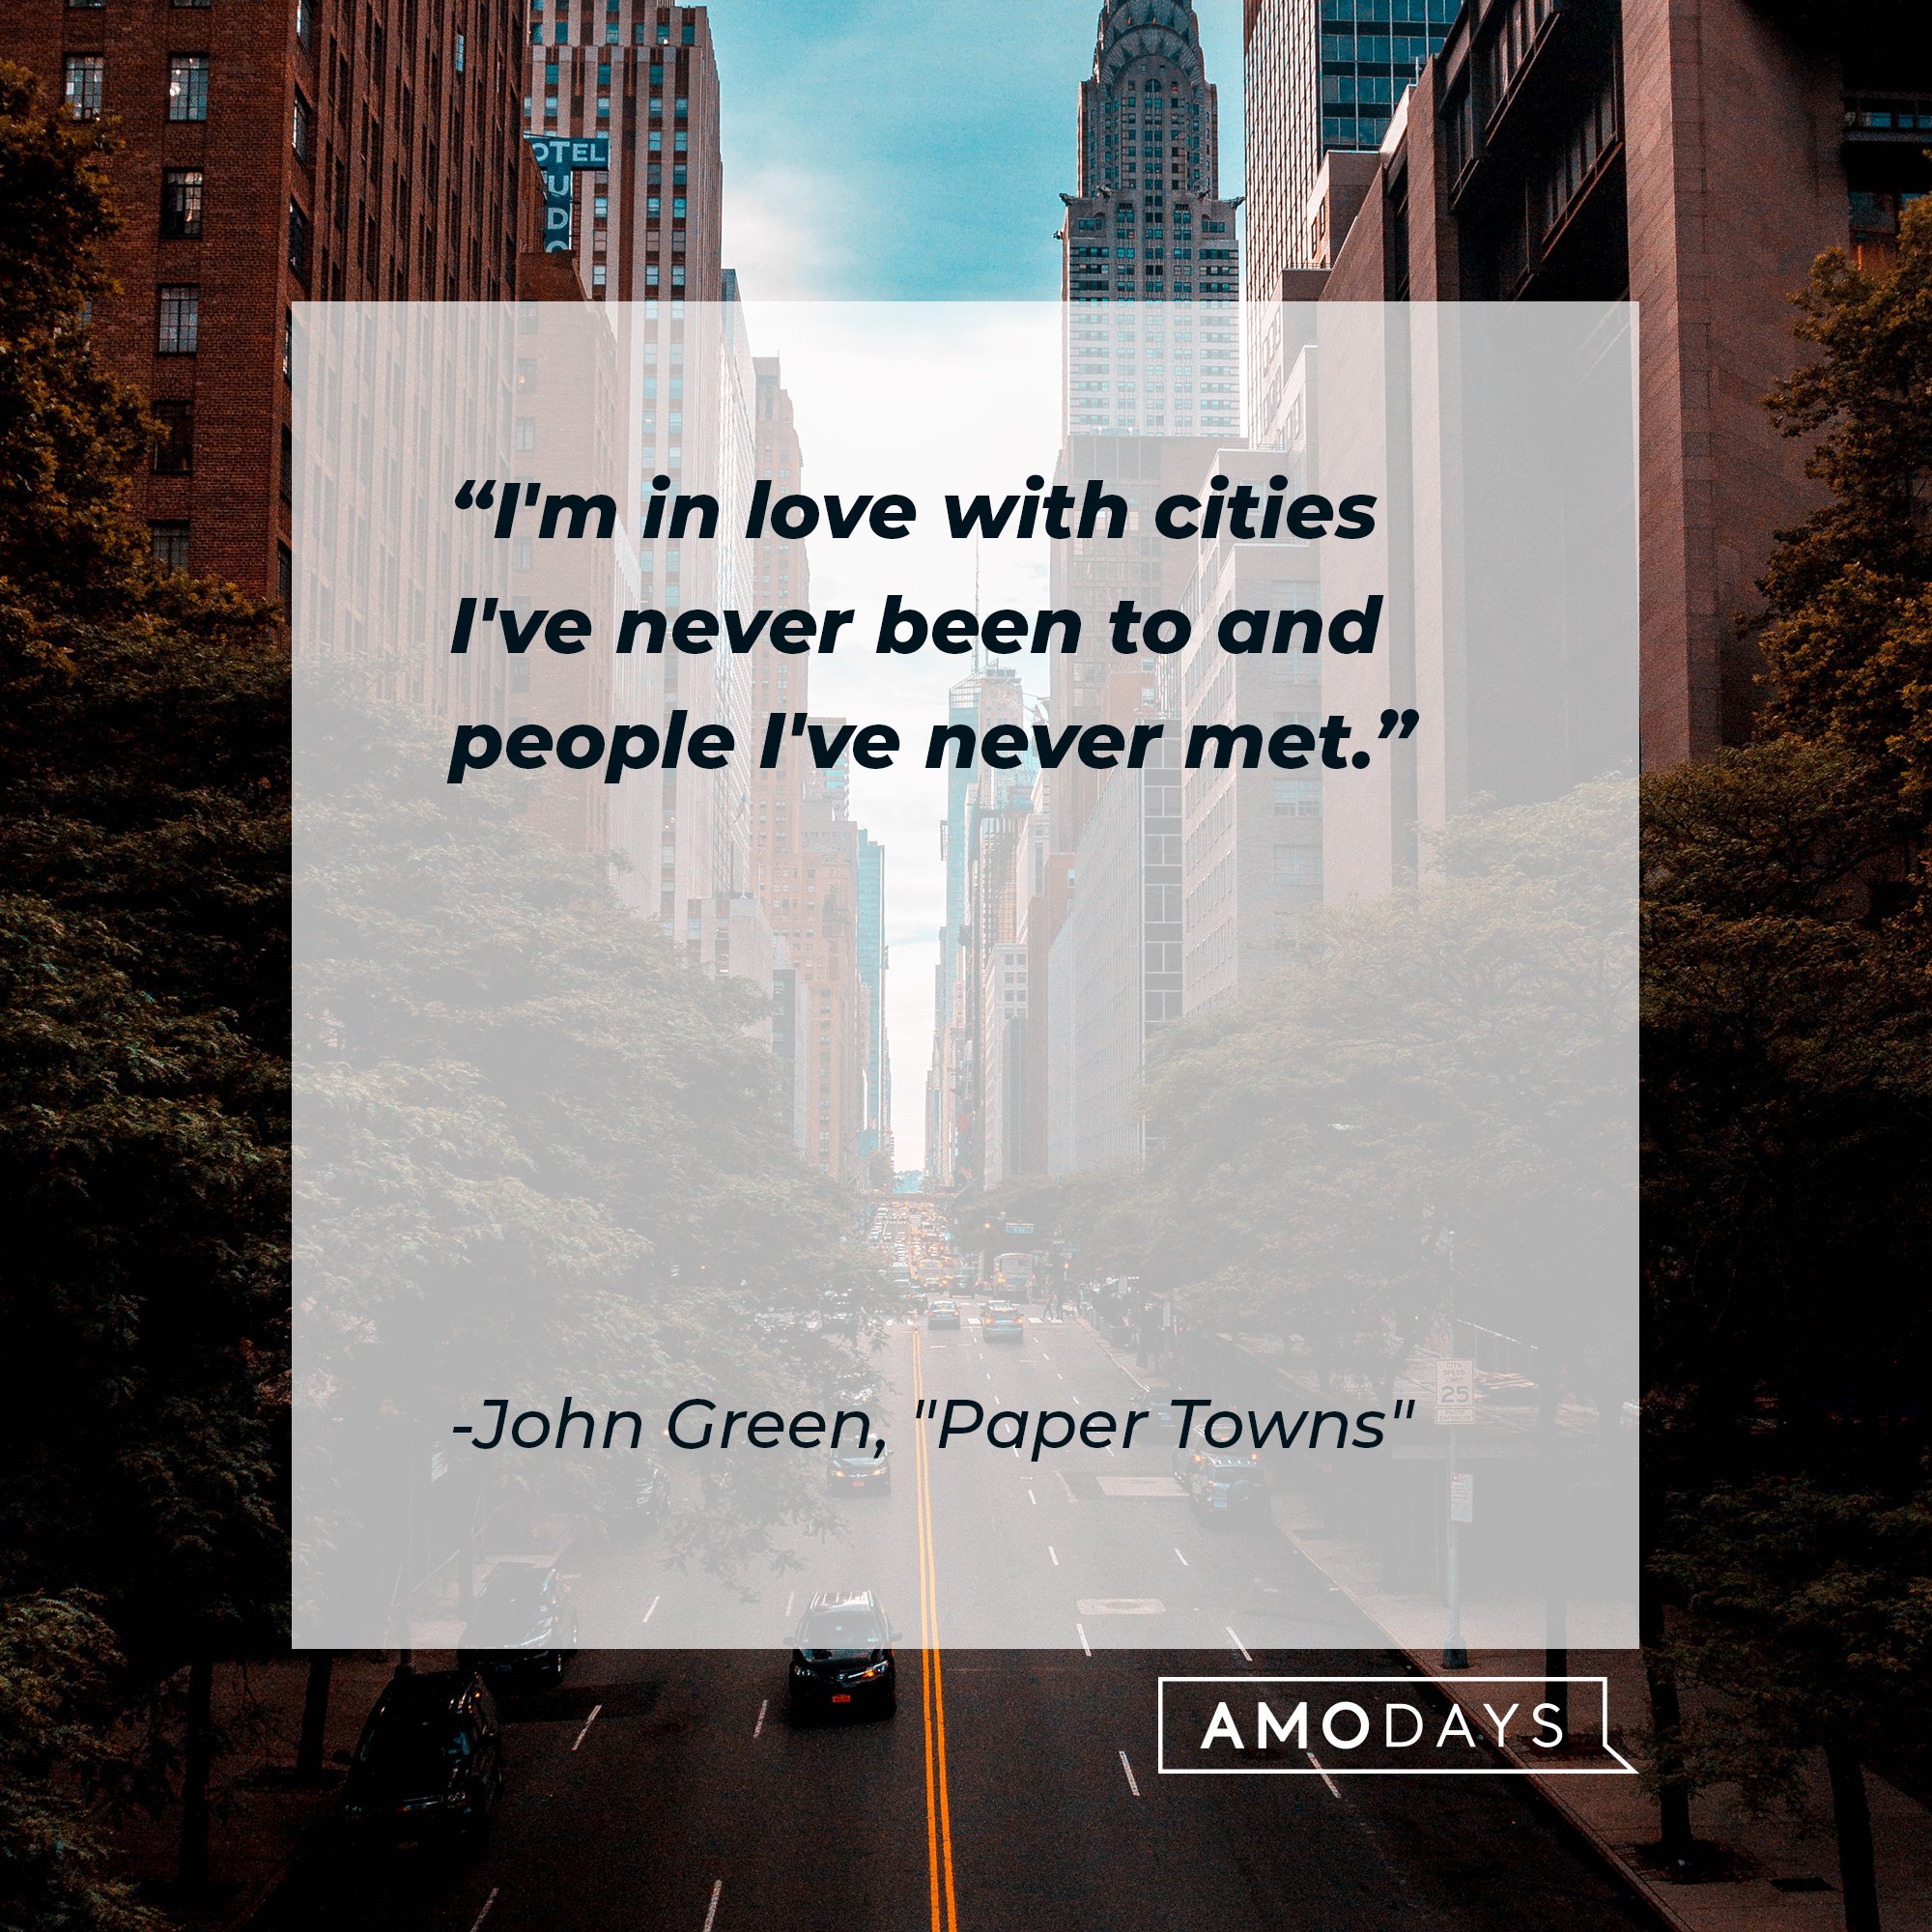 John Green's quote from “Paper Towns": “I'm in love with cities I've never been to and people I've never met." | Image: AmoDays